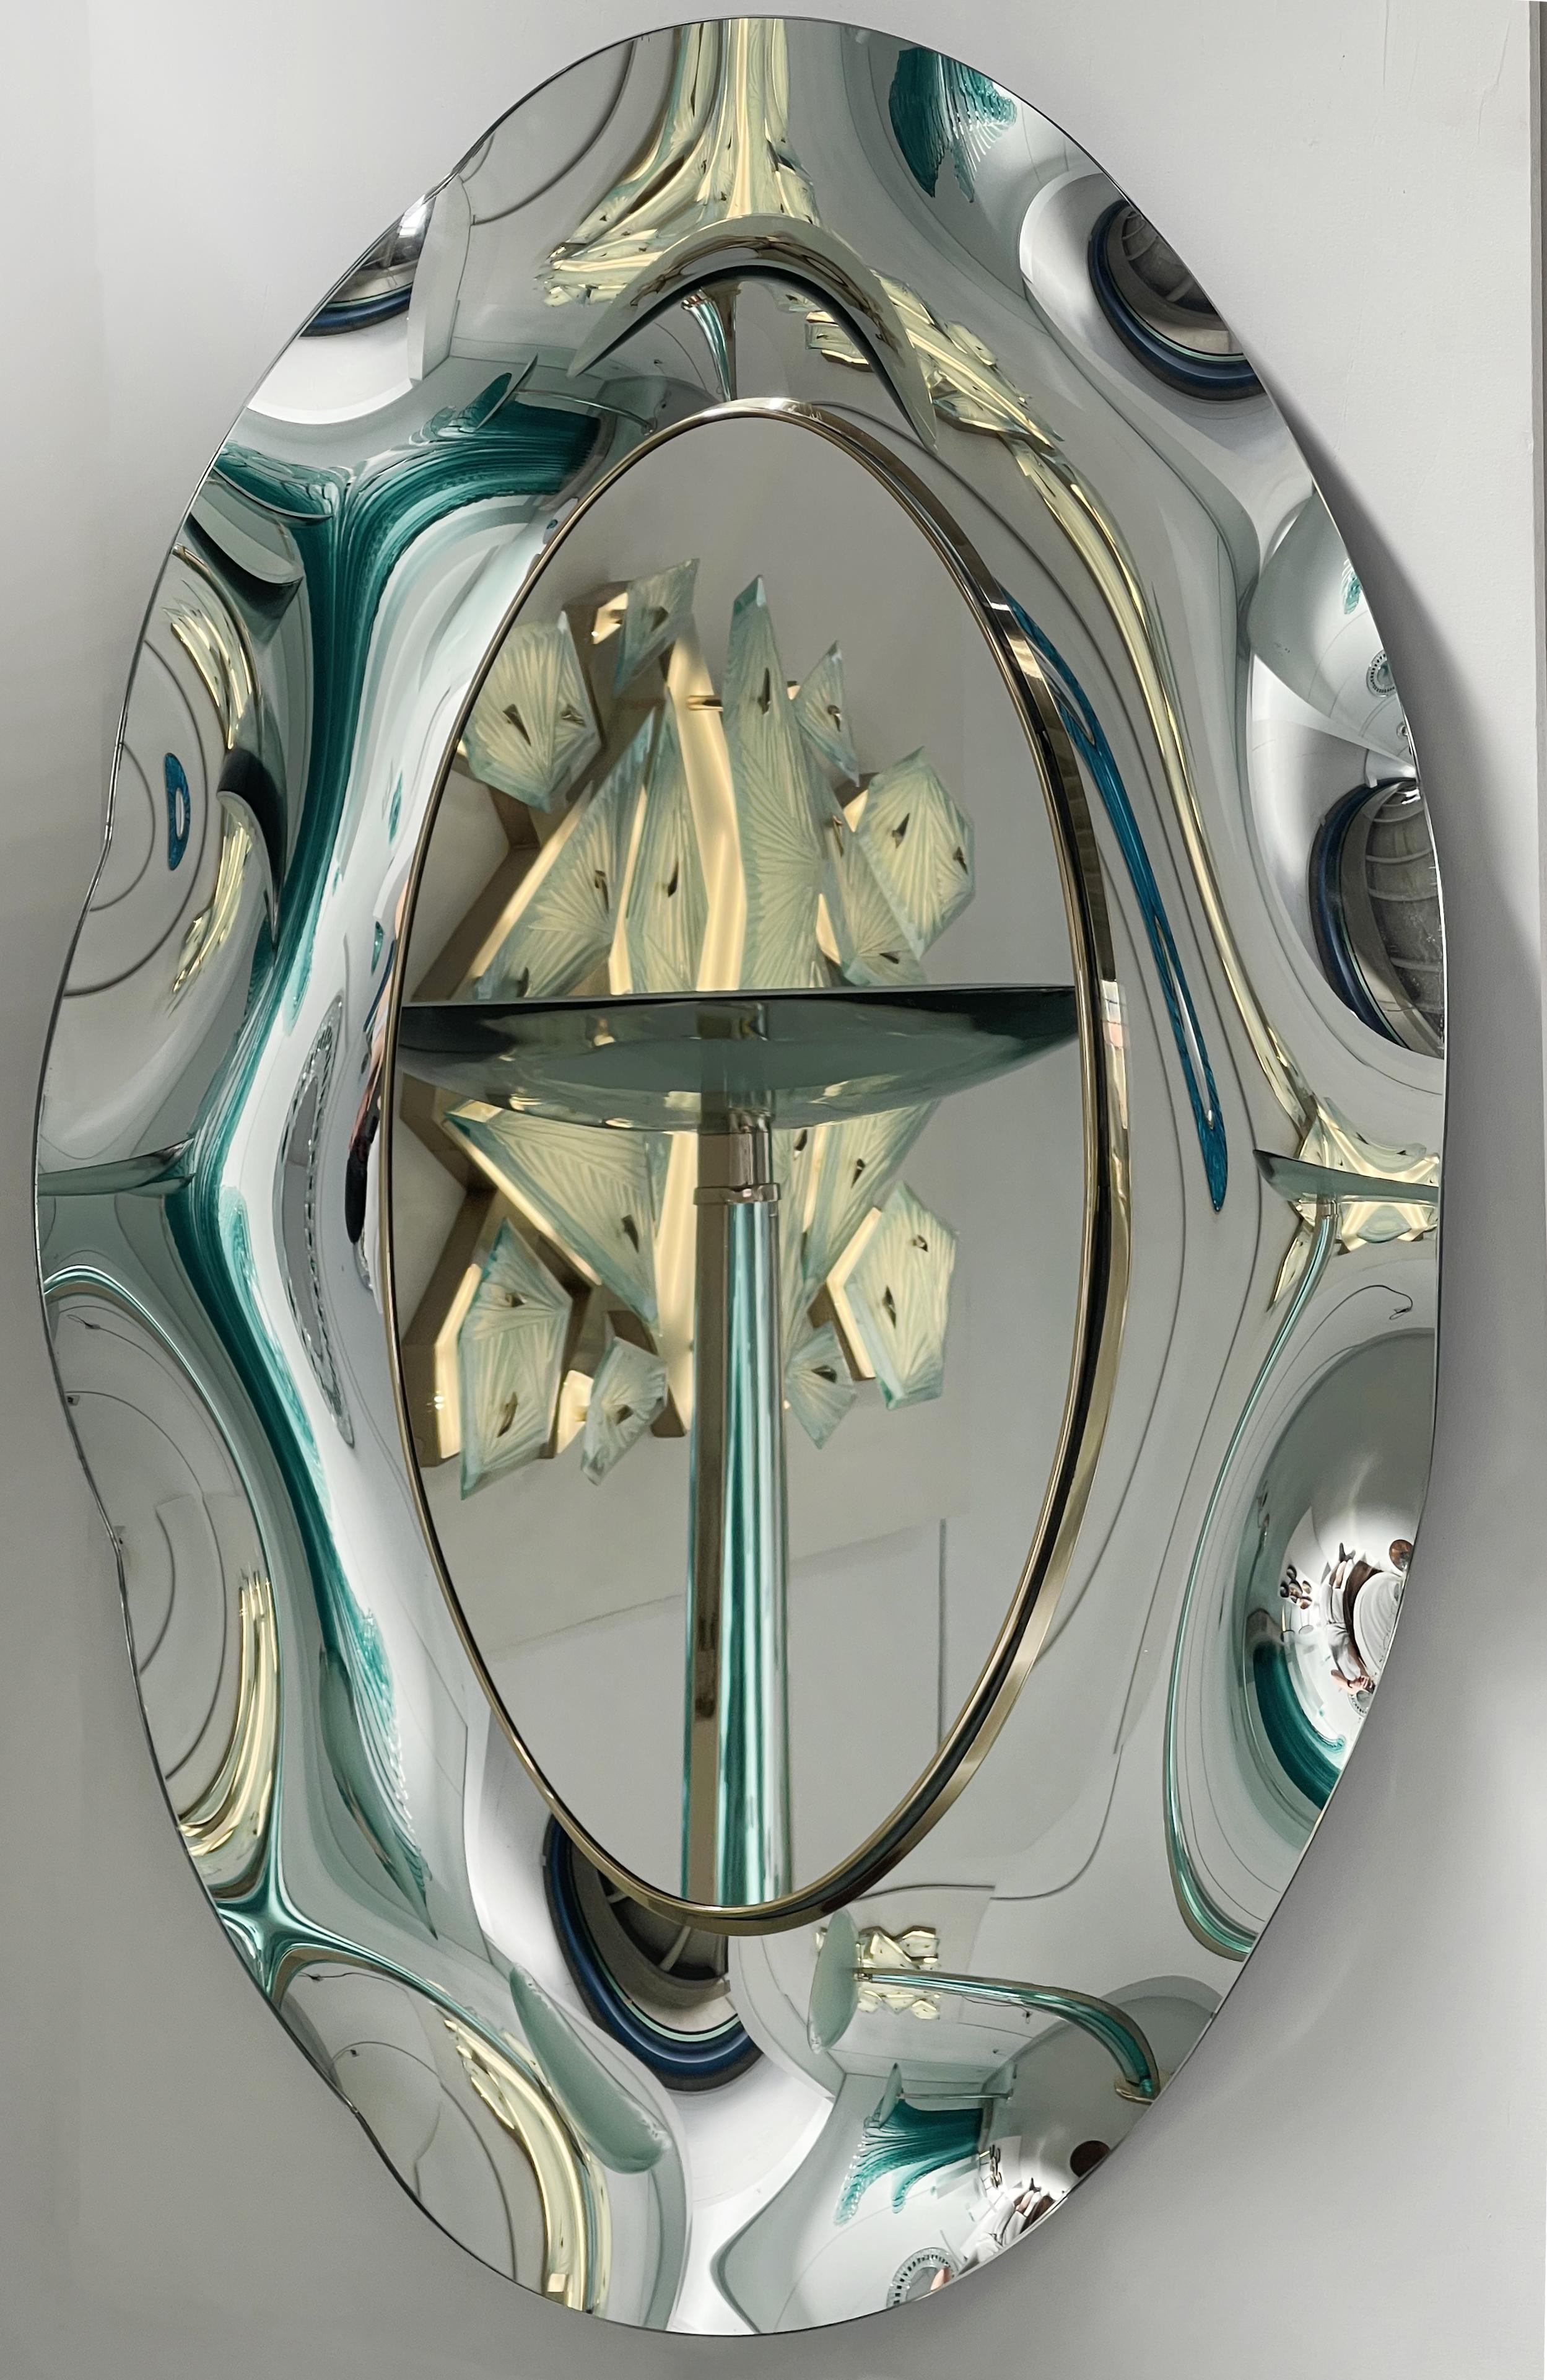 
The 'Undulate' wavy mirror is perfect synthesis of timeless style, innovative design and italian craftsmanship excellence. The crystal has been hand-worked and expertly curved by the artist.
The support structure is made of wood and brass. The